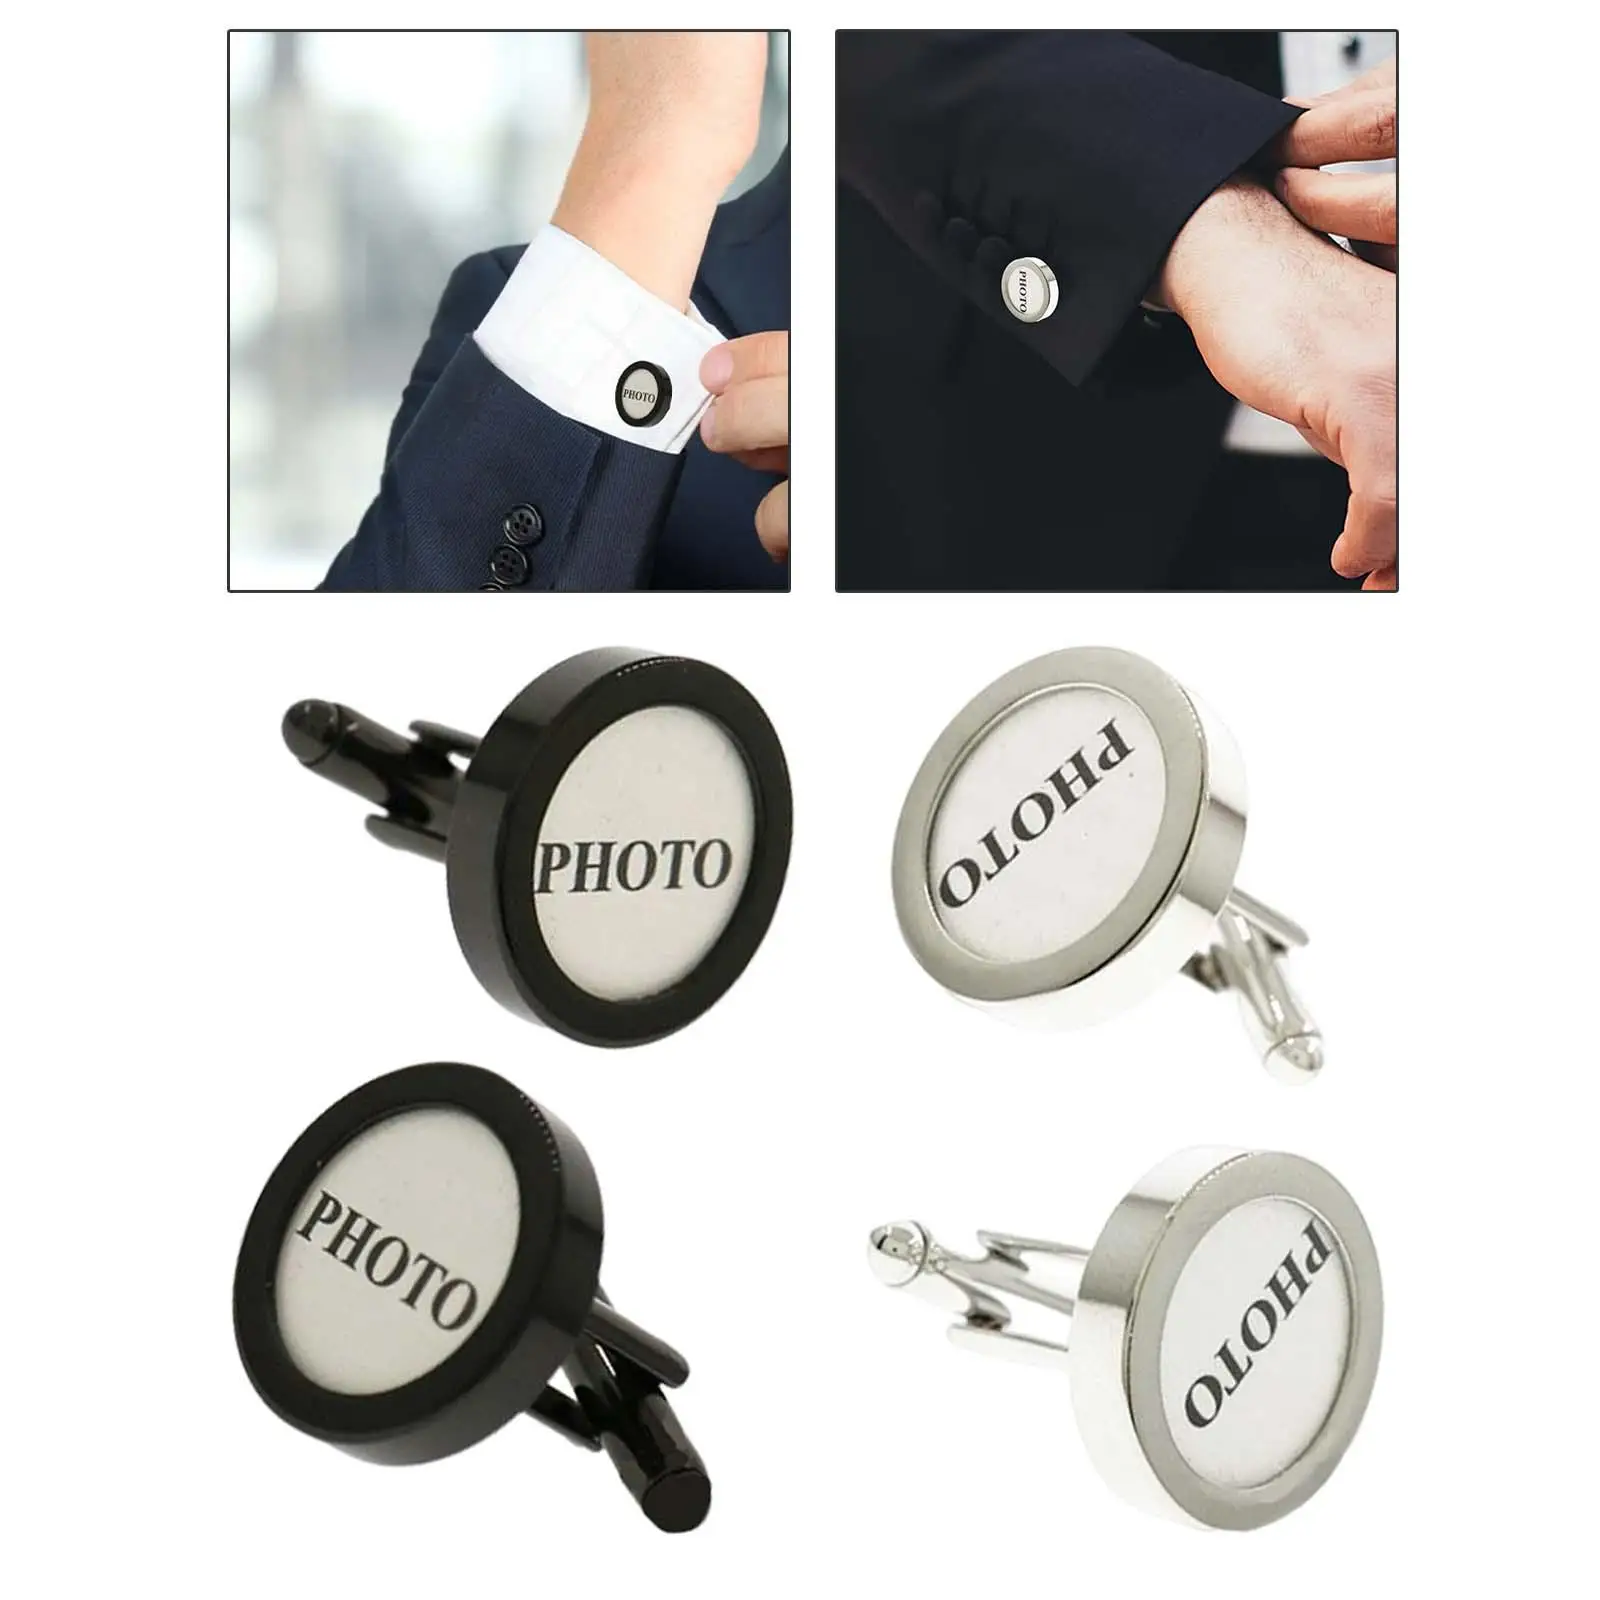 2x Stylish Cufflinks Shirt Accessories Jewelry Gifts Business Groom Shirt Cuff Links for suits Banquet Party Graduation Meeting